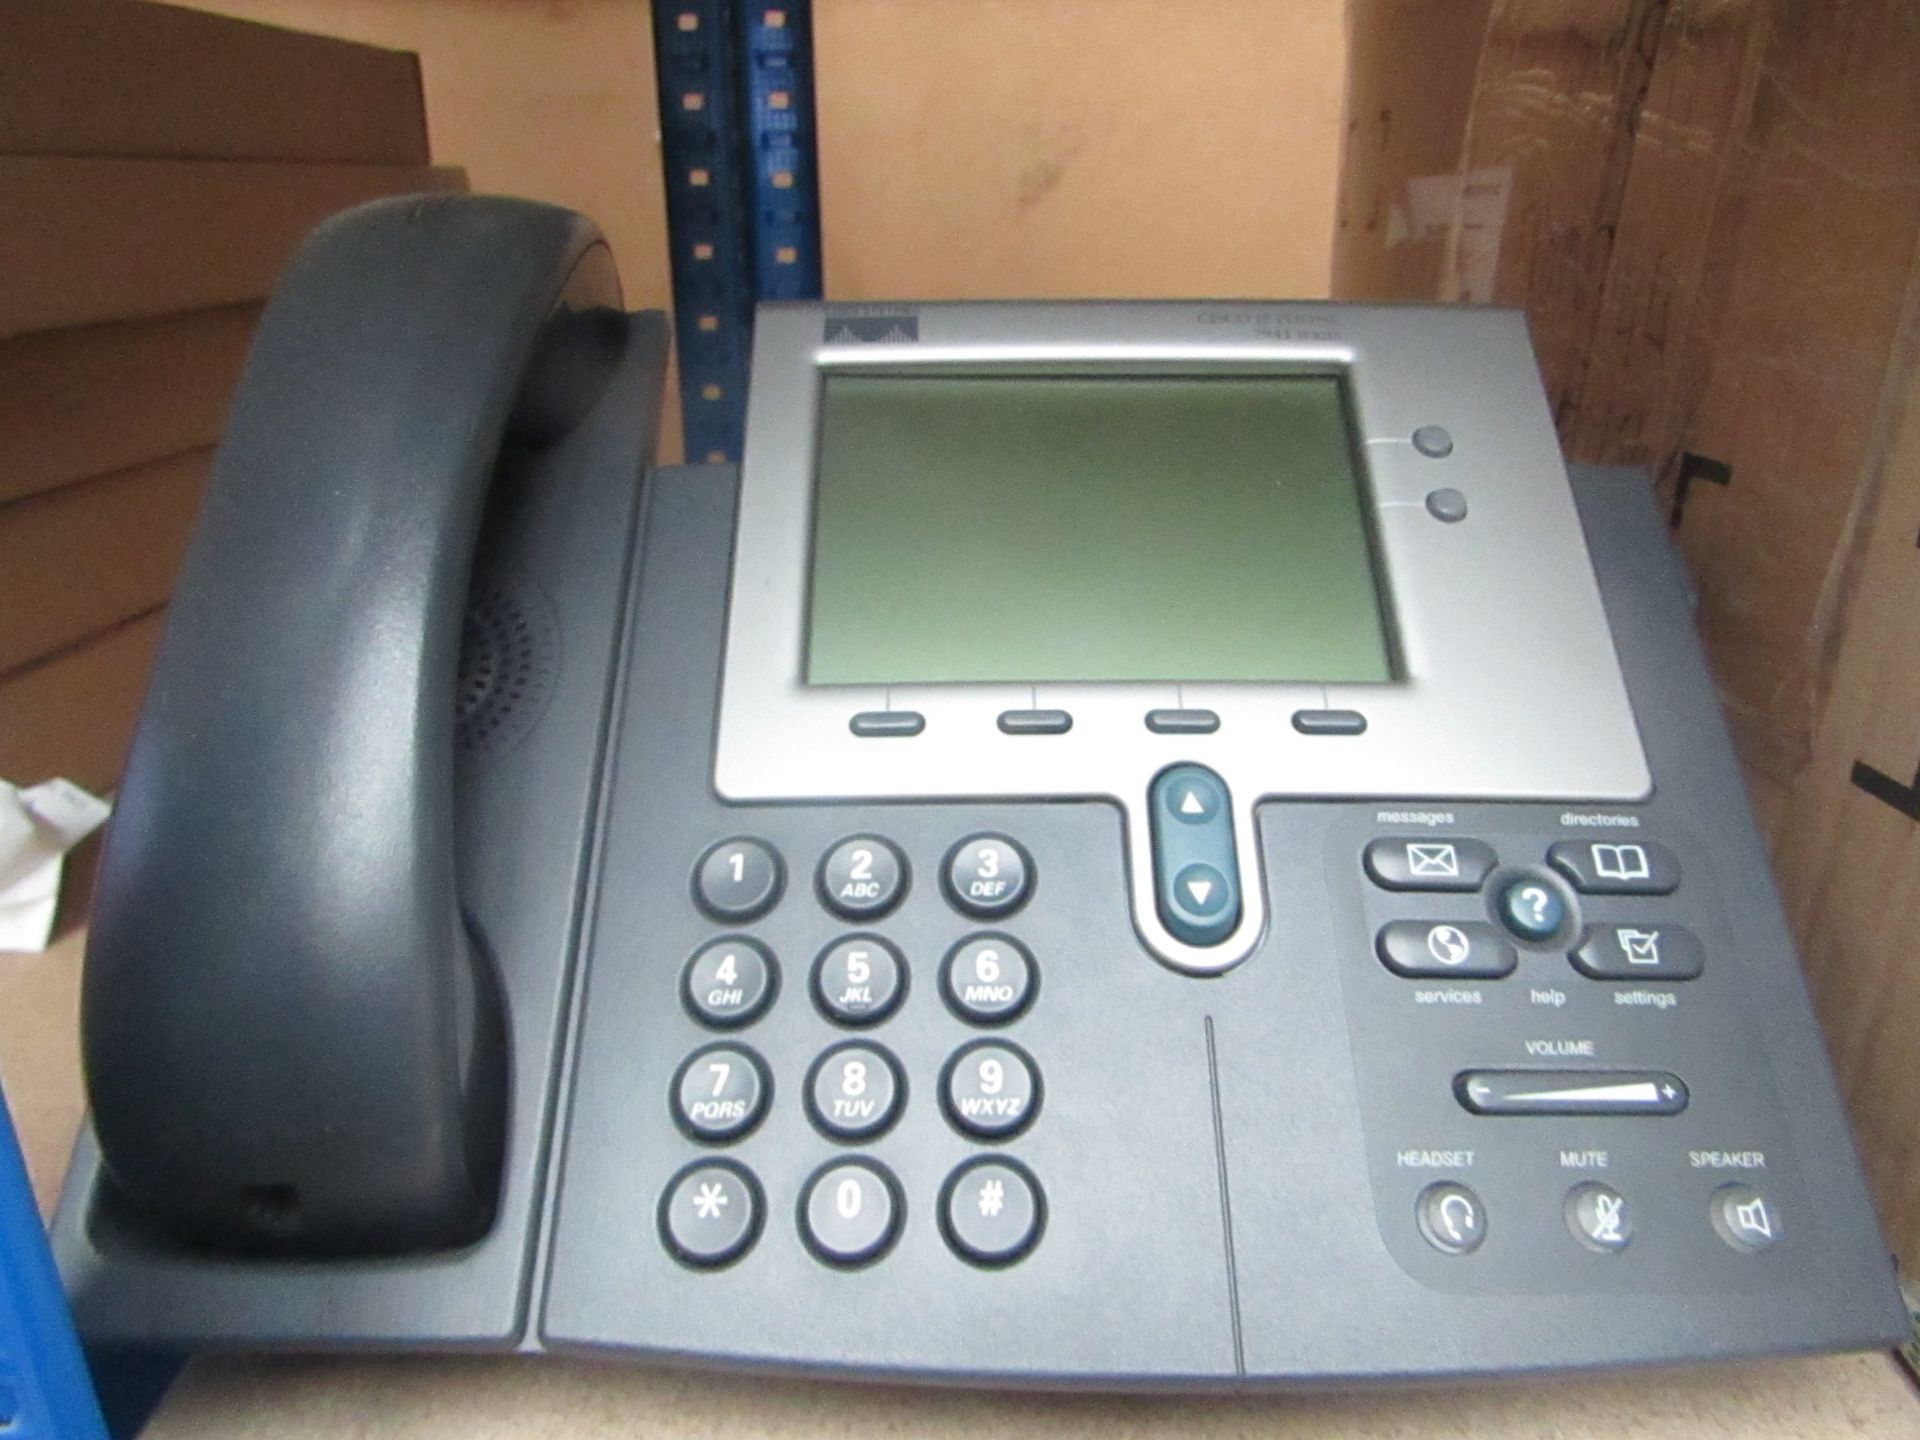 Cisco office phone with answering machine, tested working and boxed.